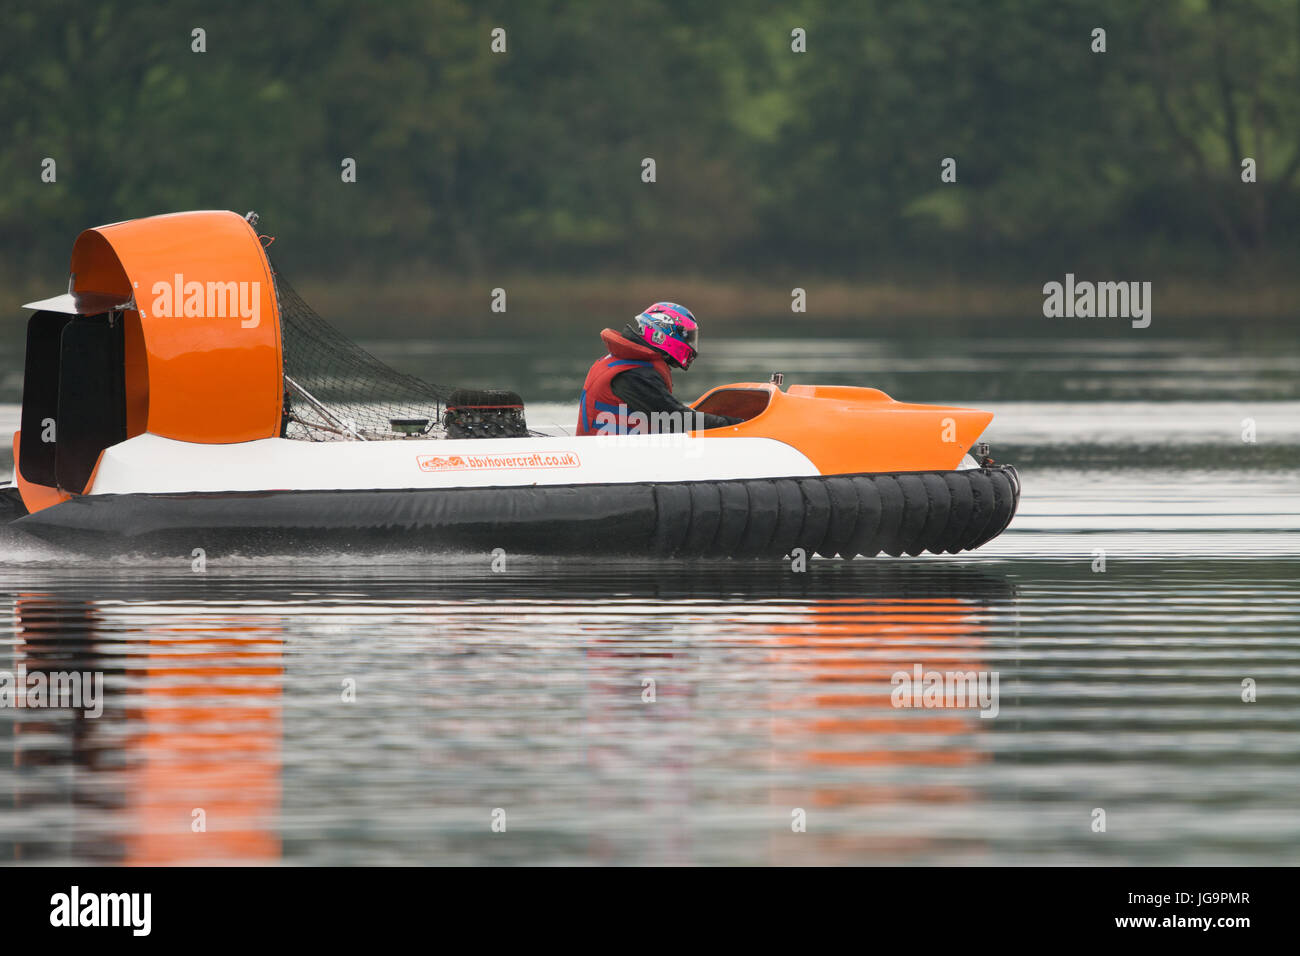 Guy Martin attempting Hovercraft speed record on Loch Ken, Dumfries and Galloway, Scotland Stock Photo